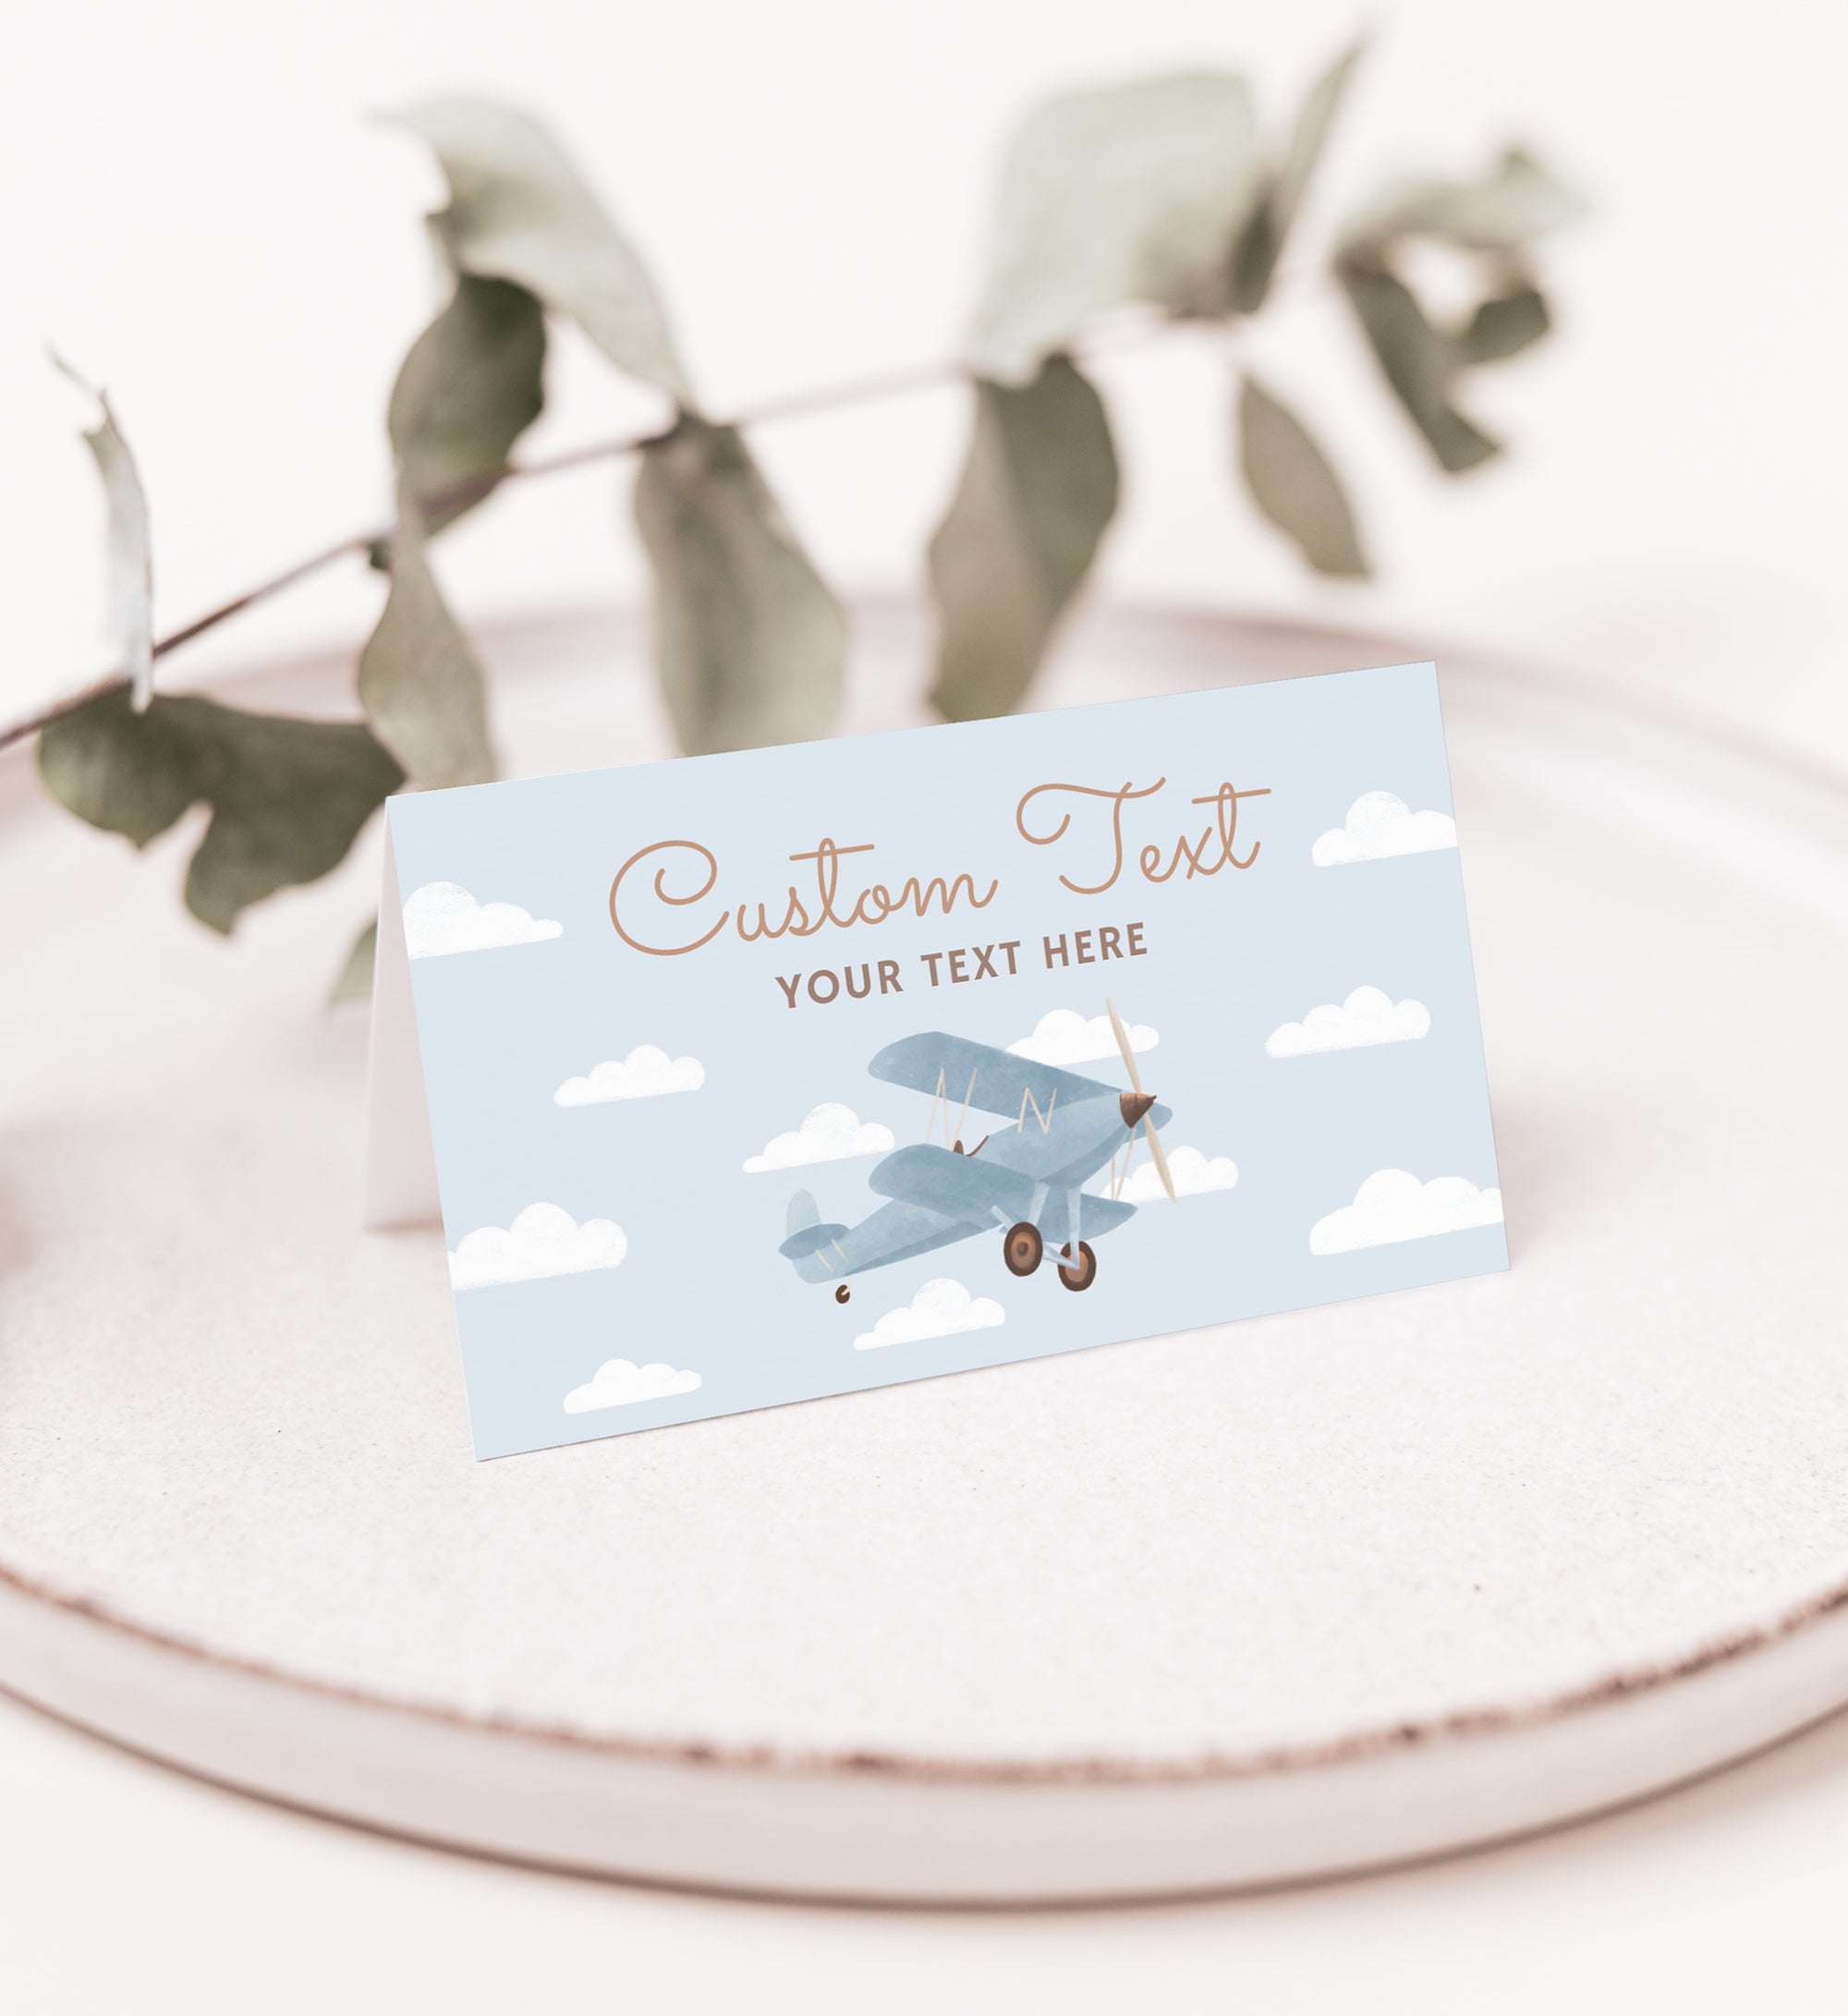 Editable Airplane Birthday Party Food Label Template